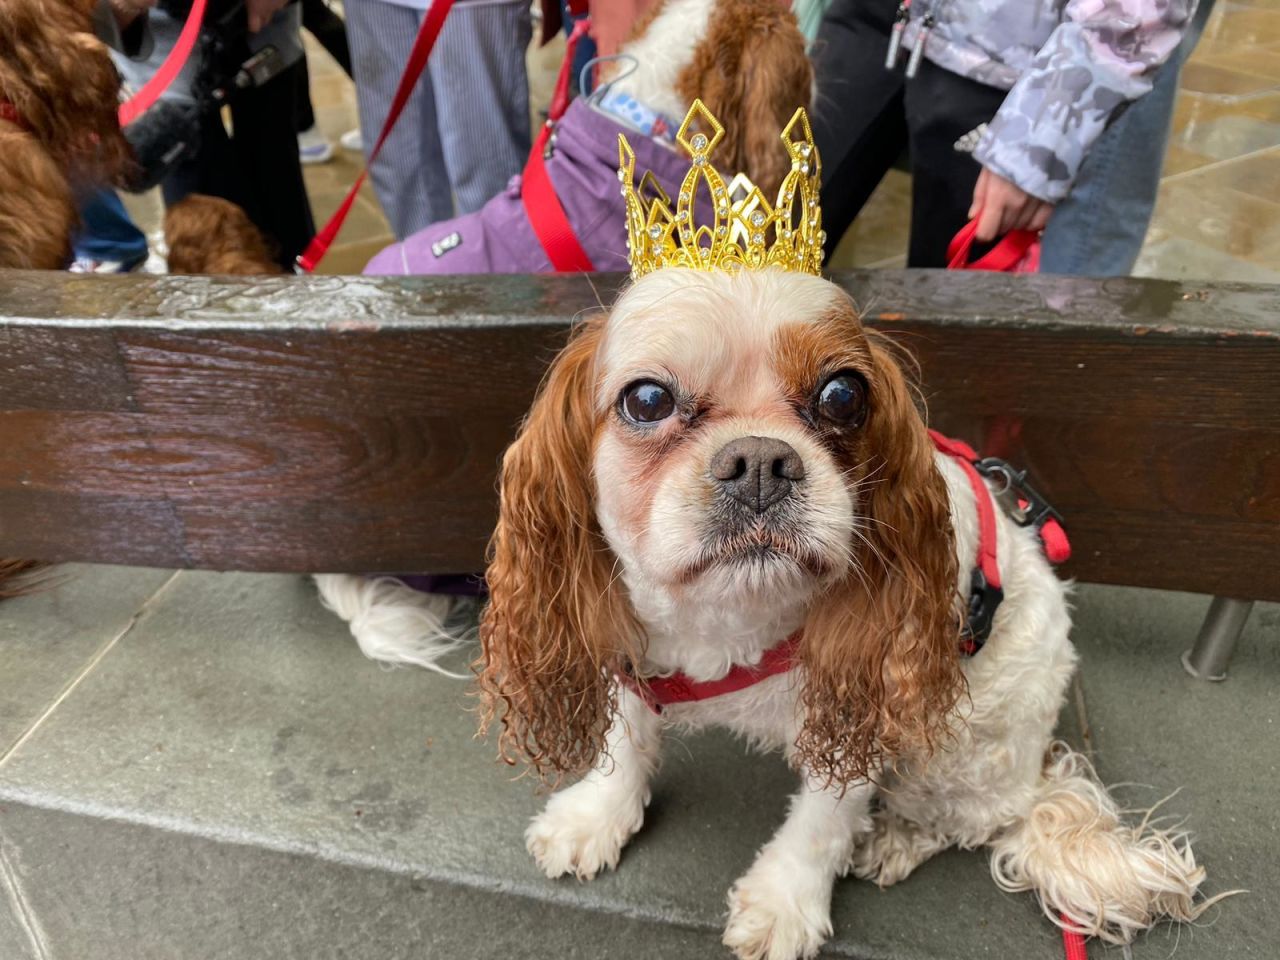 Monica the dog gets the royal treatment on Coronation Day in London.